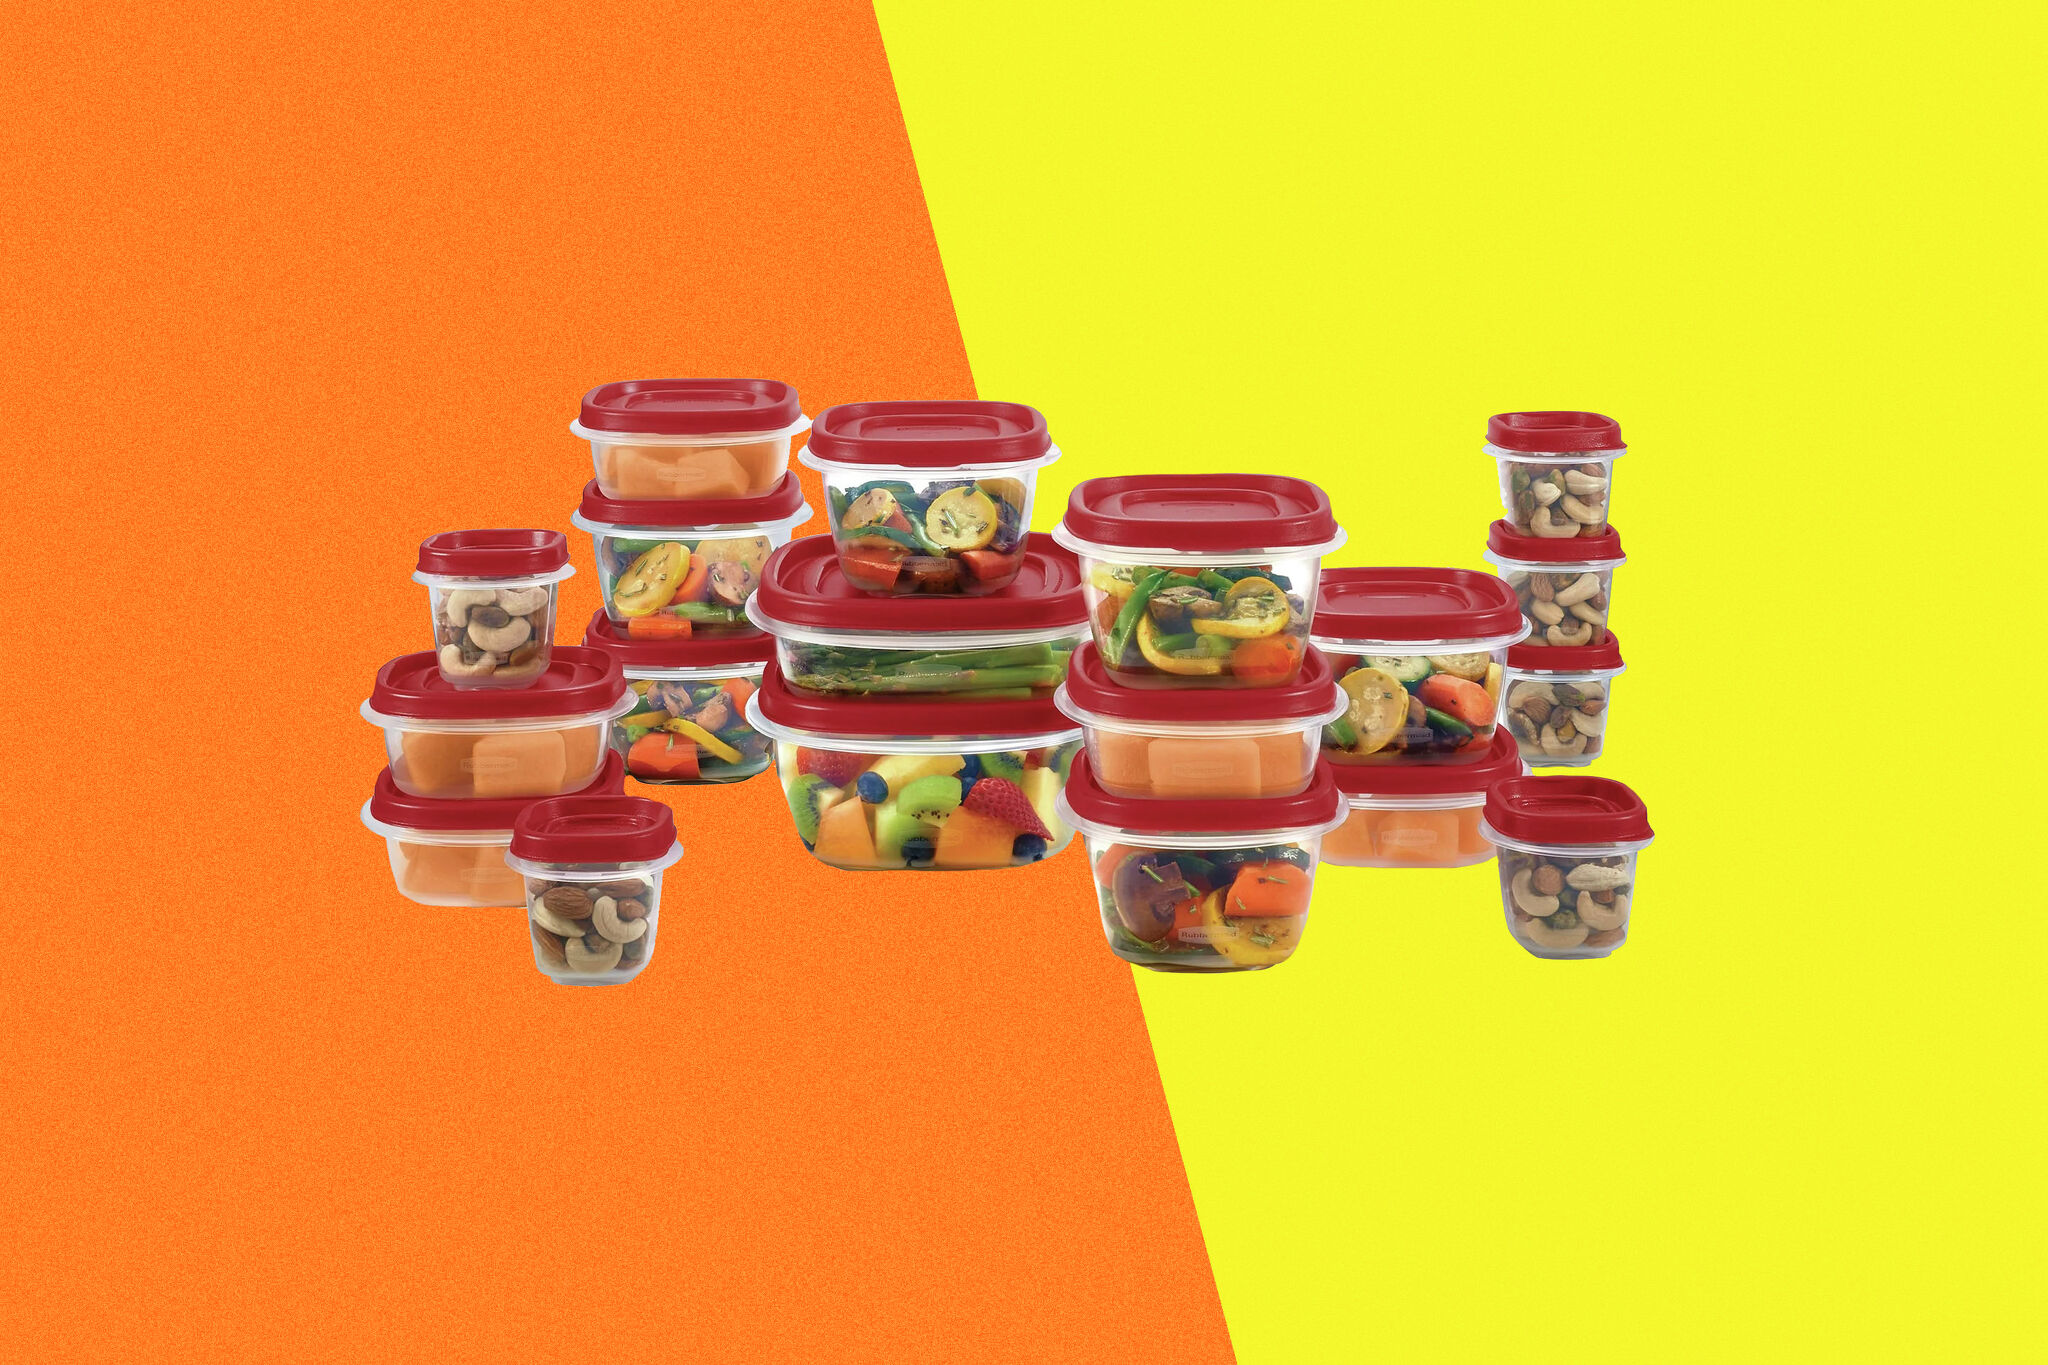 38-Piece Rubbermaid Food Storage only $9 at Walmart :: Southern Savers